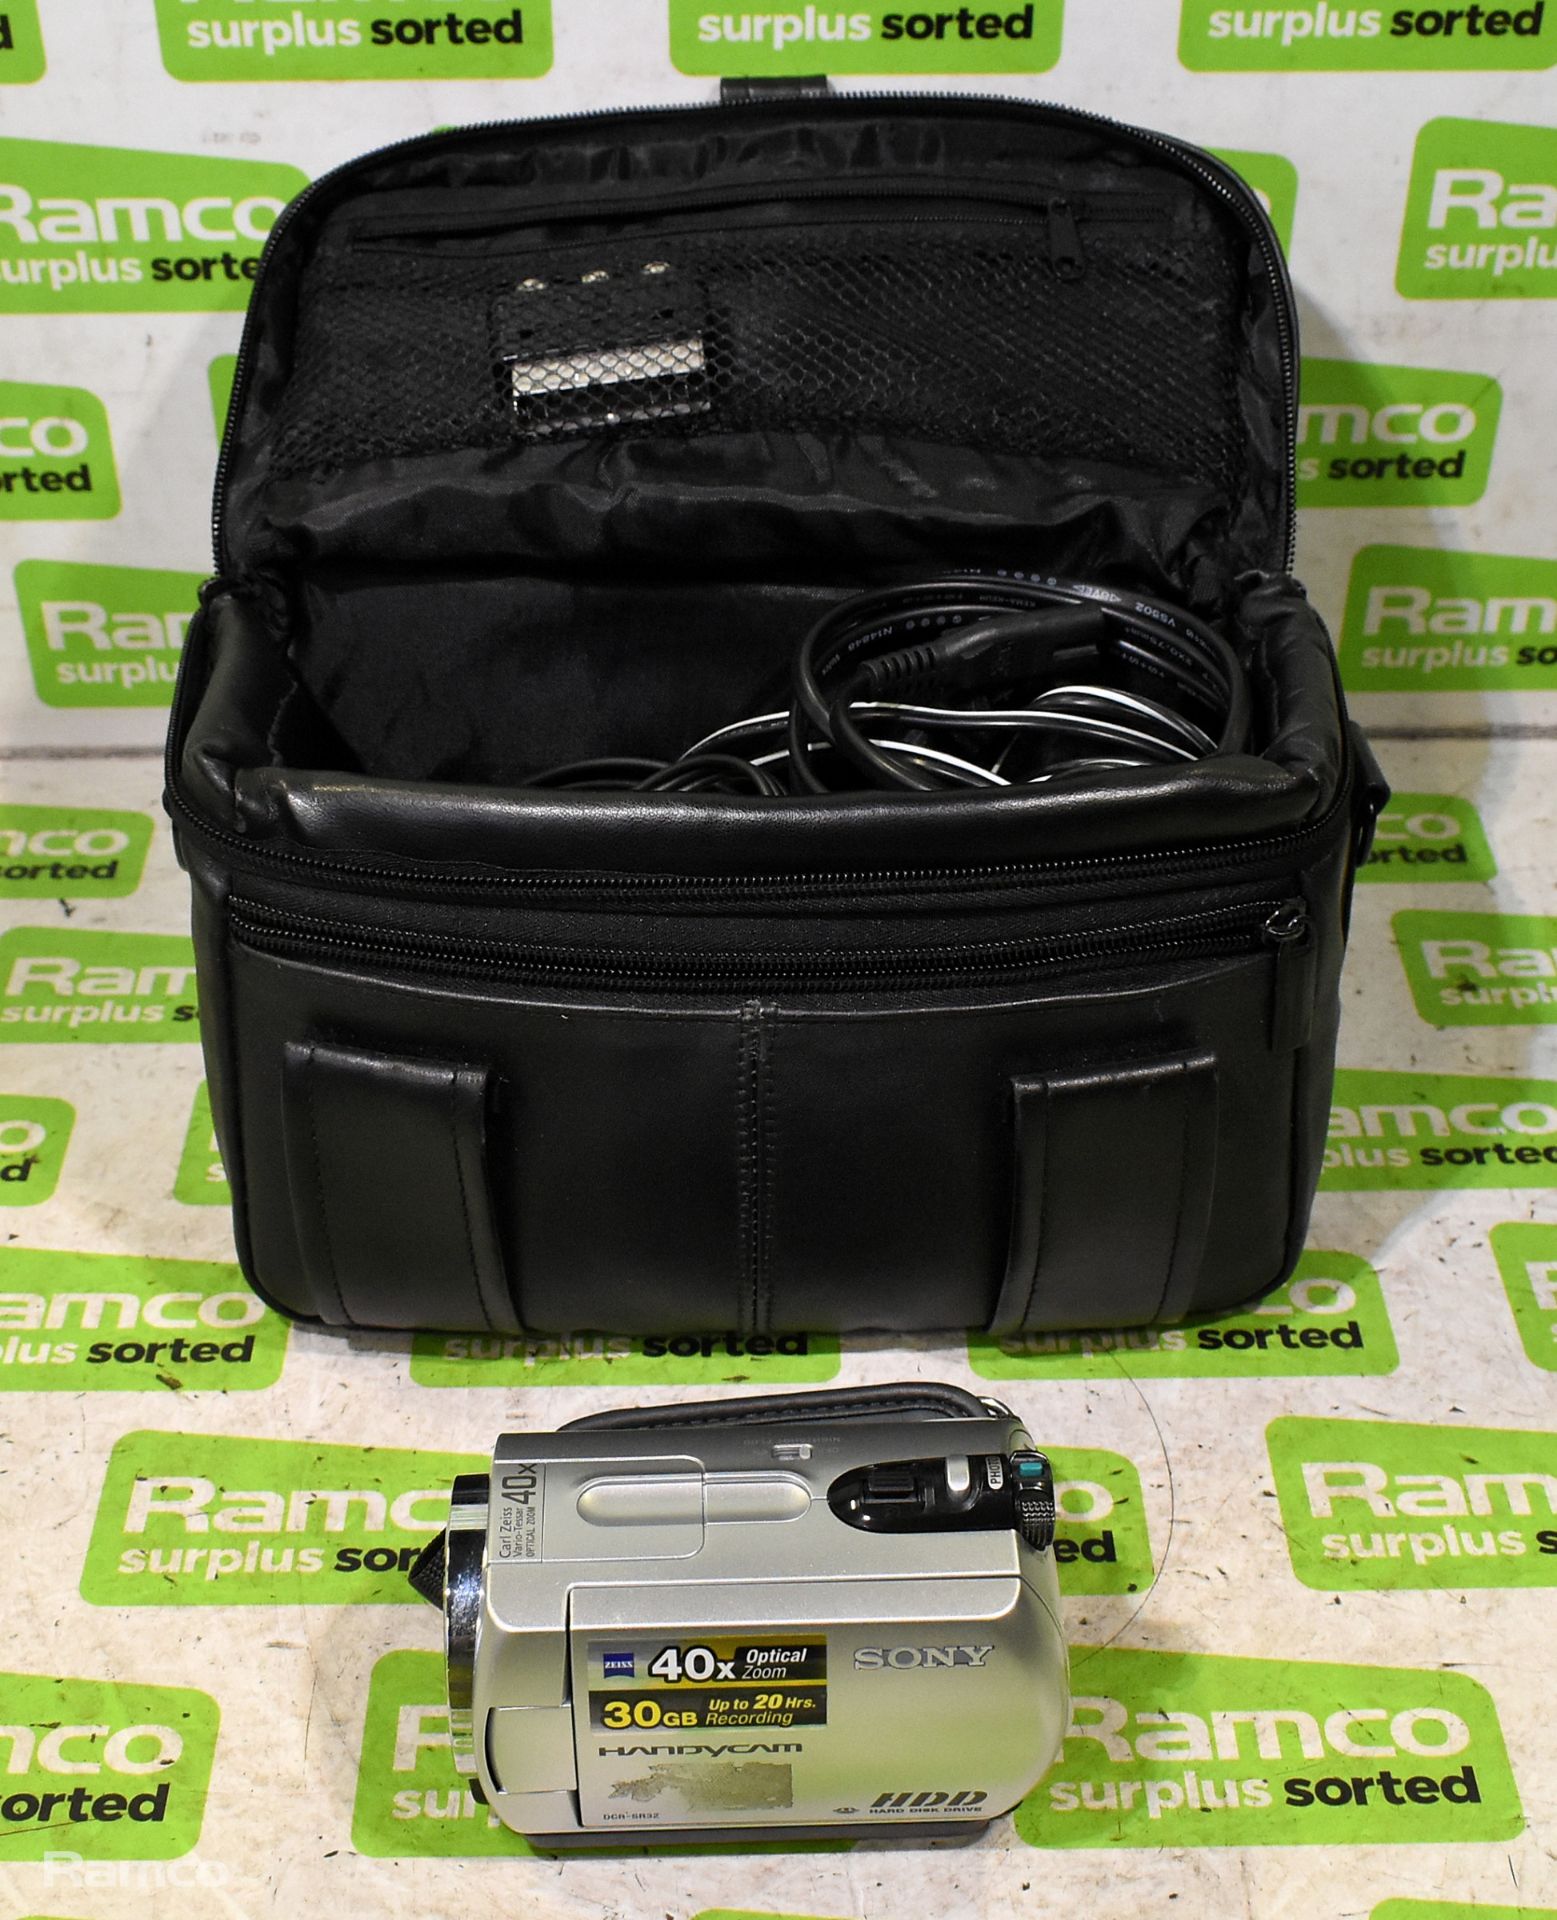 Sony DCR-SR32 handycam camcorder with accessories and bag